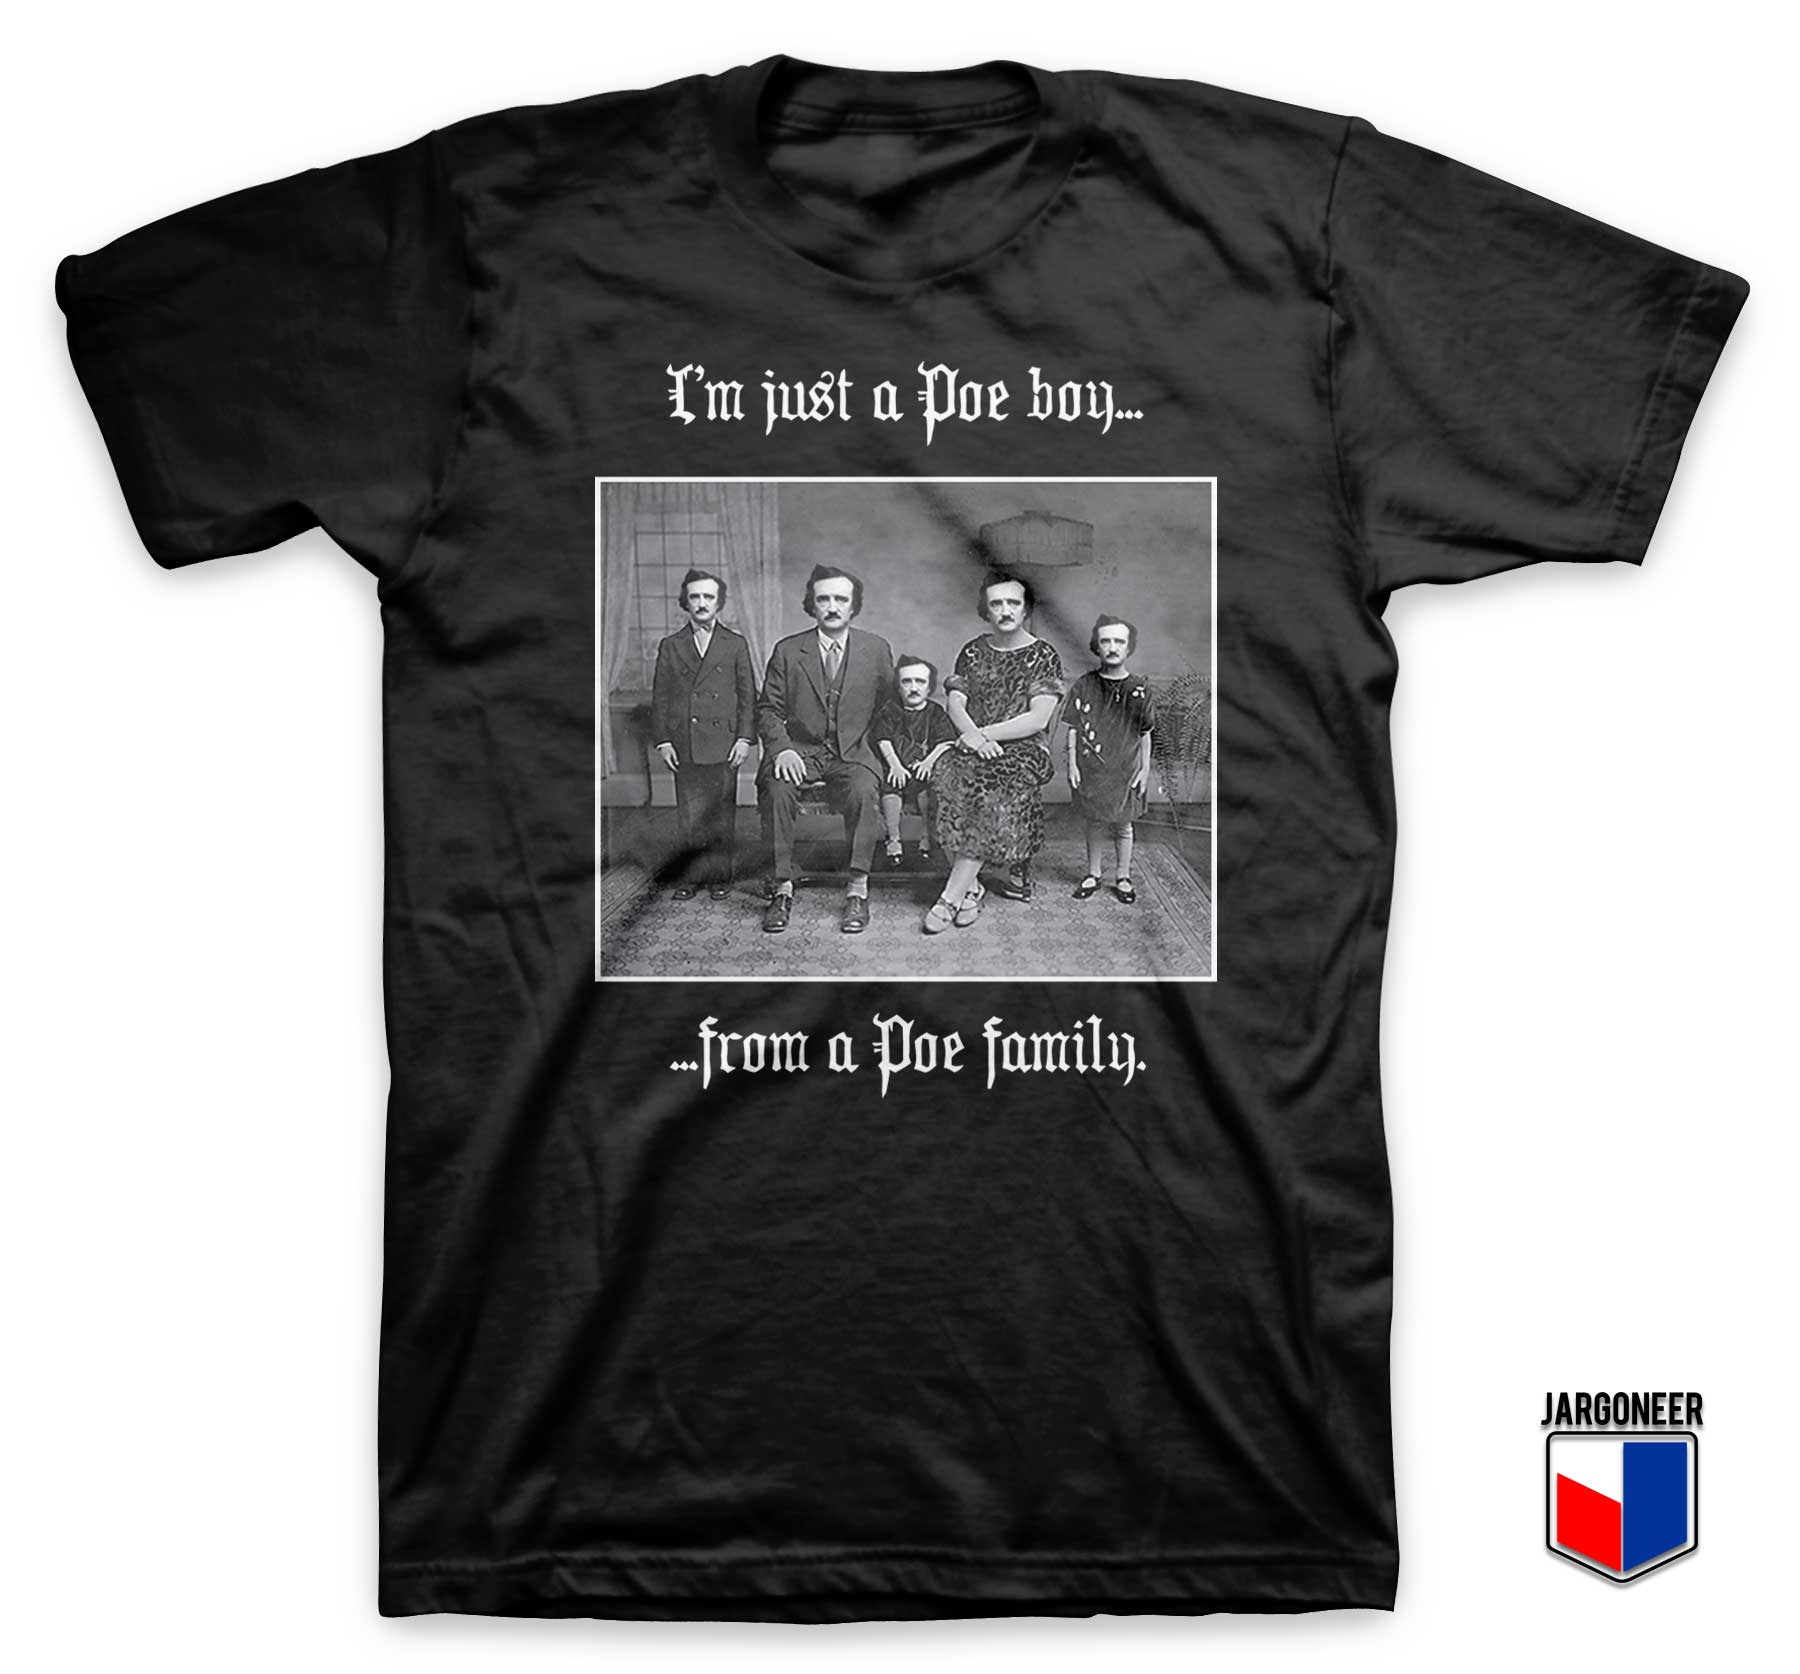 Im Just A Poe Boy From a Poe Family T Shirt - Shop Unique Graphic Cool Shirt Designs